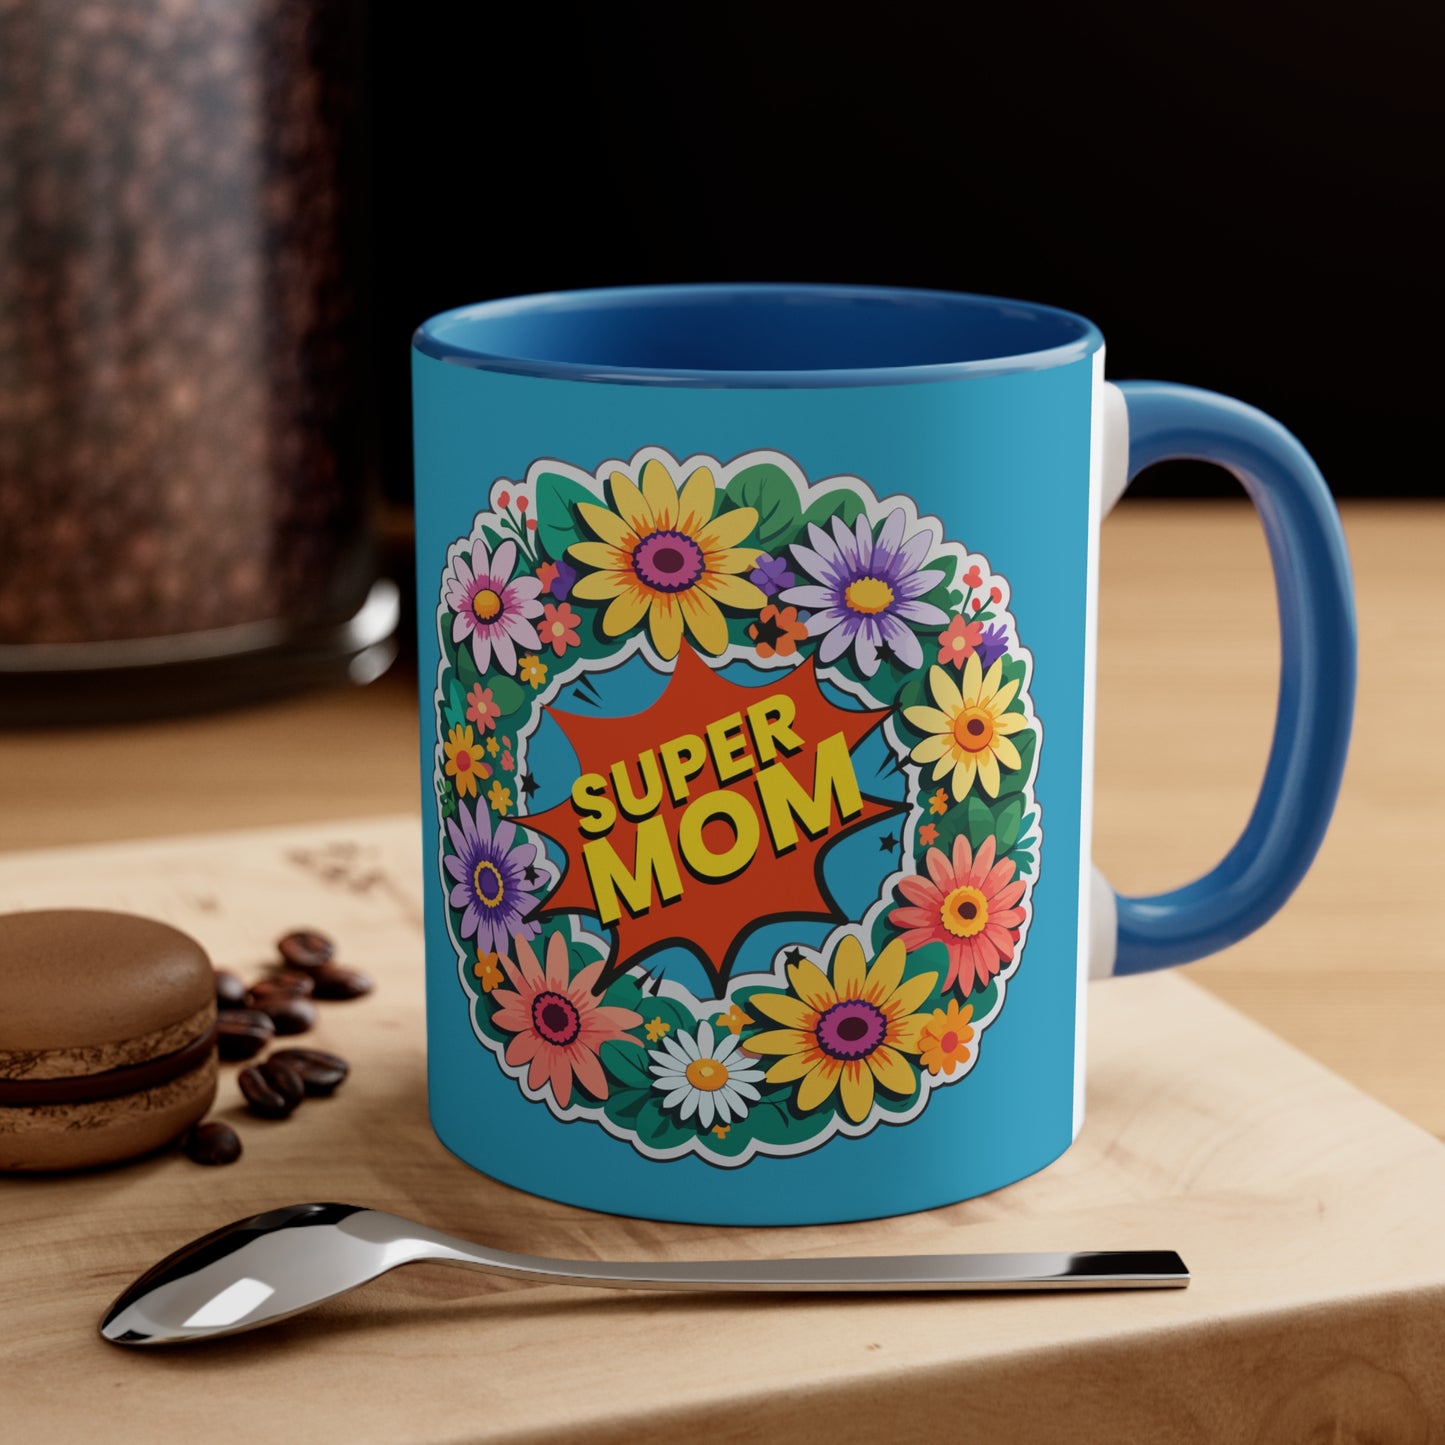 Super Mom on Turquoise